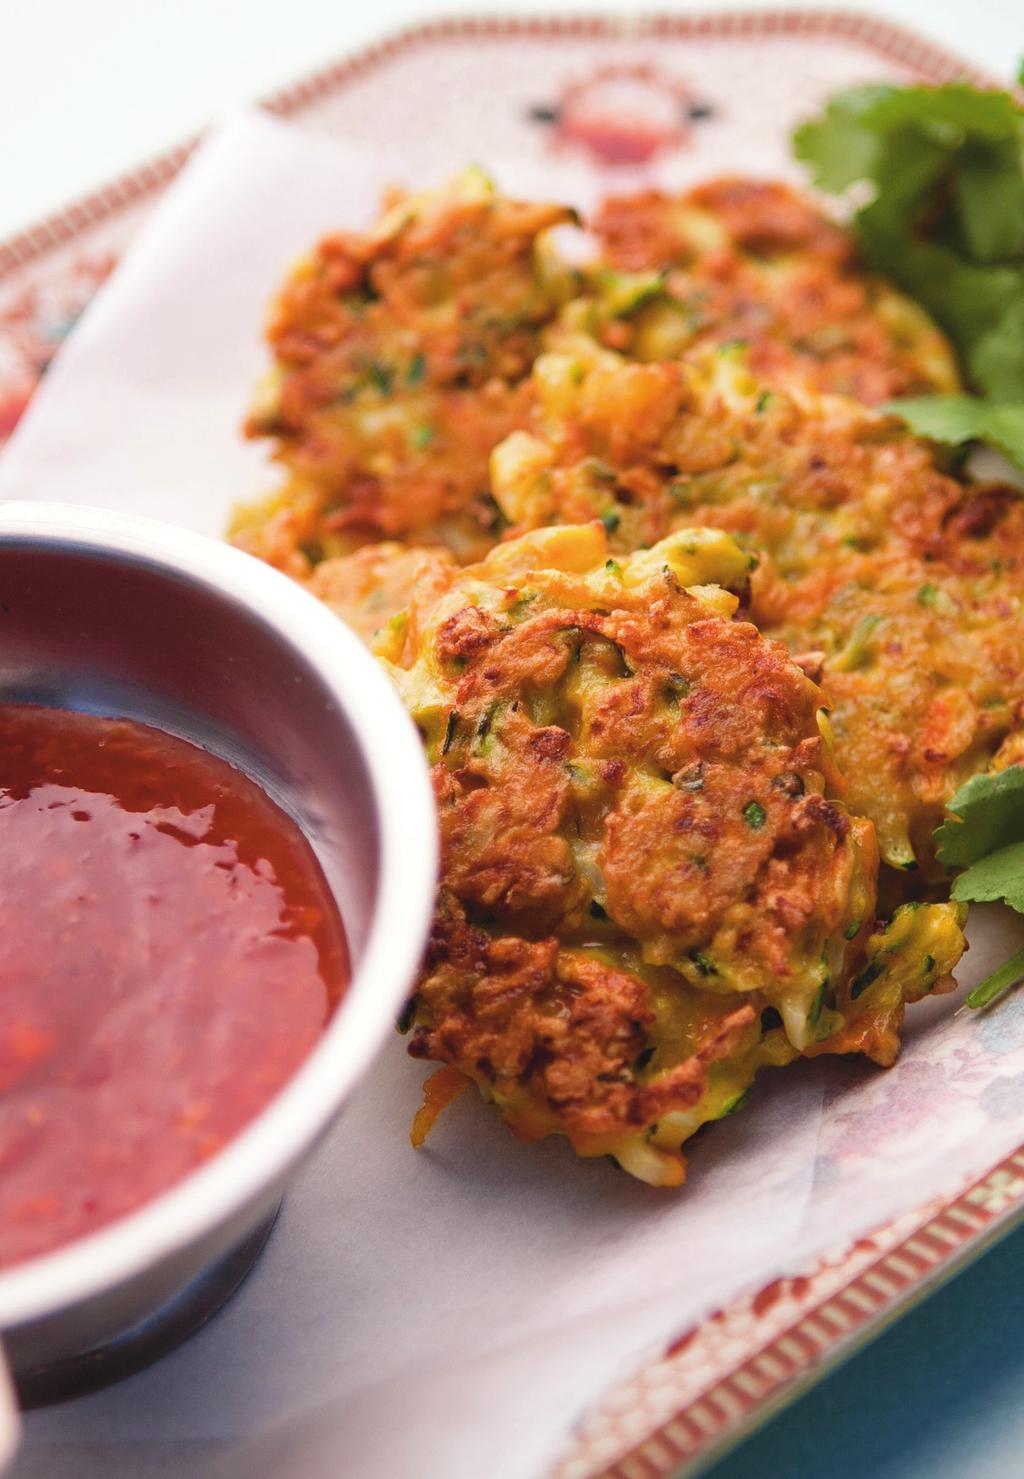 Spiced Vegetable Fritters Tracey-lee Hooton Serves 4 1 Onion, finely chopped 2 C Grated vegetables (whatever s cheap and in season; courgette, carrot or pumpkin work well) 1 tsp Salt 1 C Chickpea